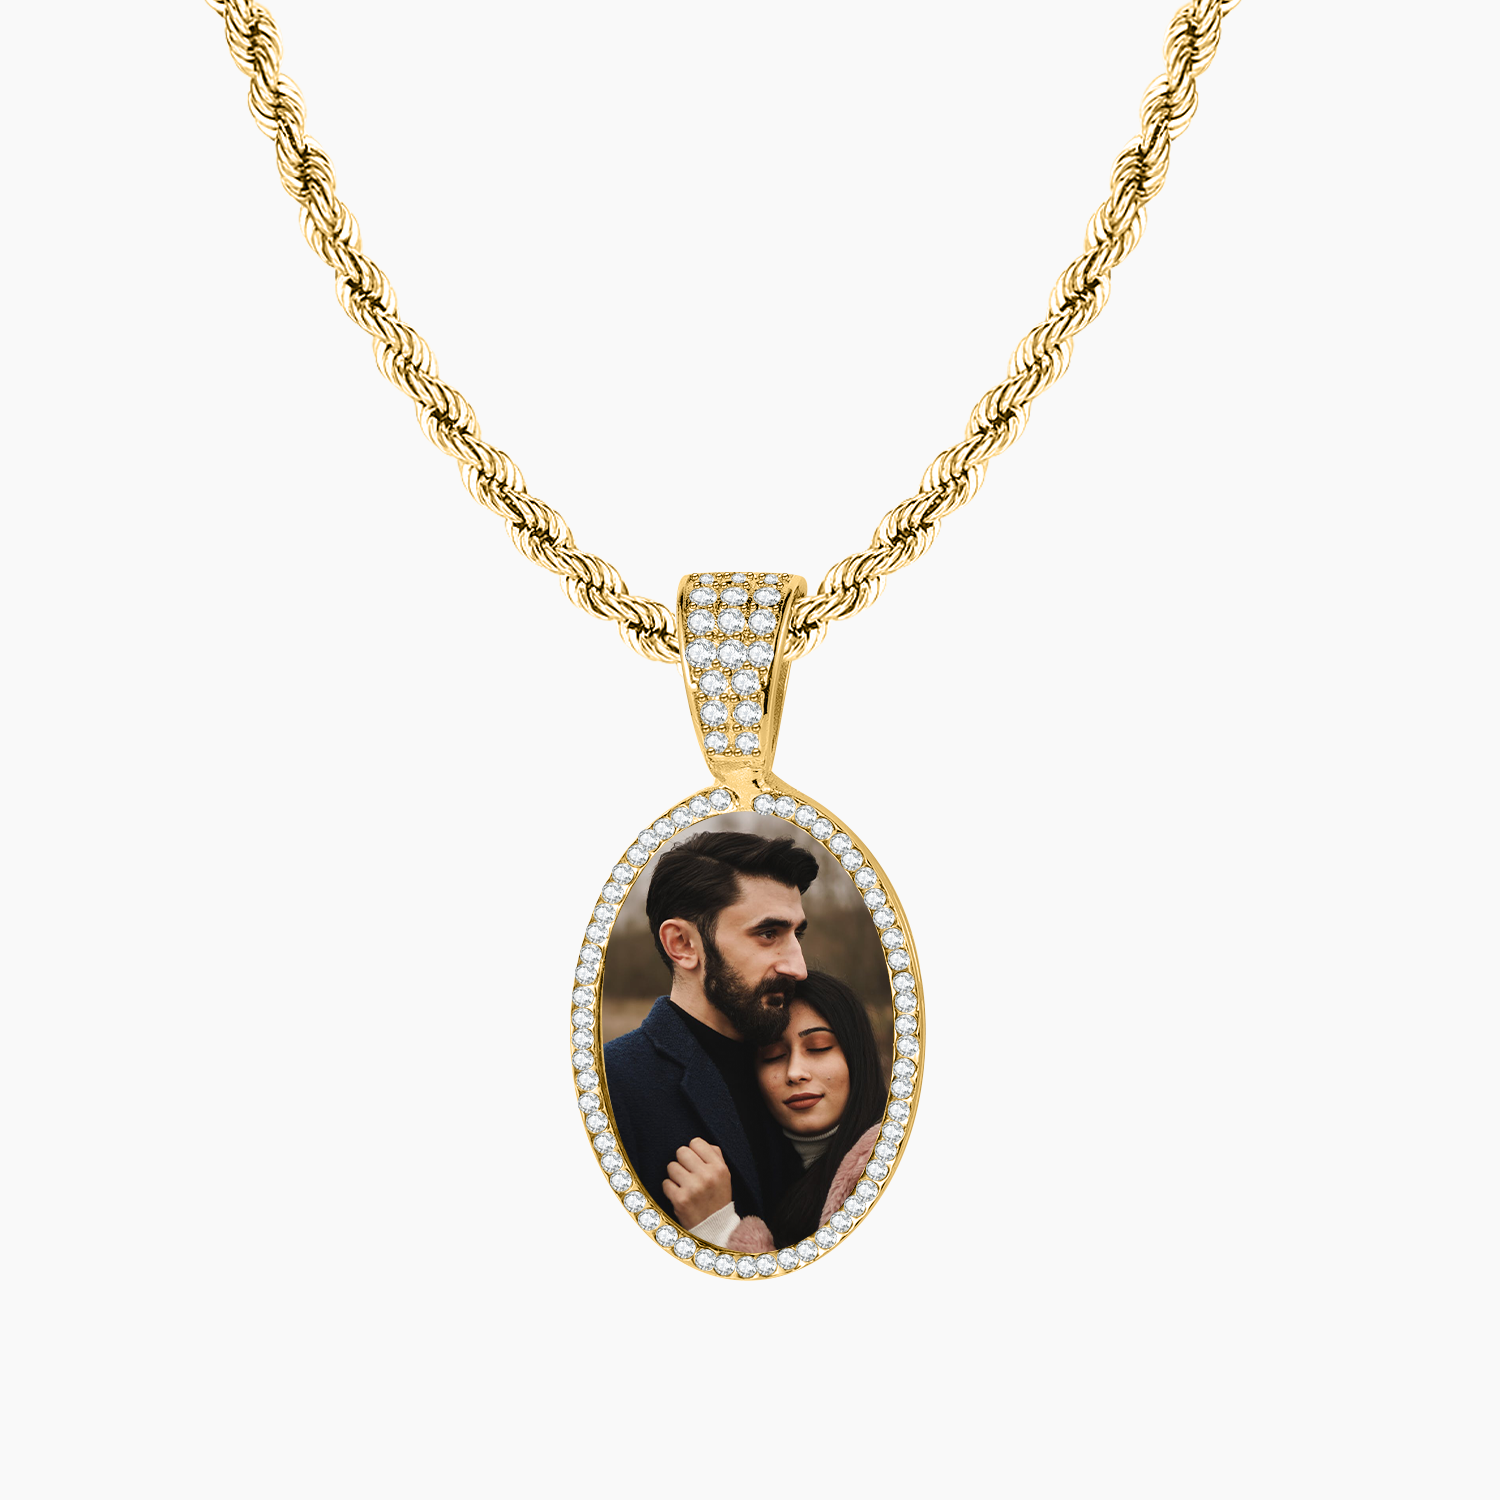 Photo Projection Necklace| Necklaces With Picture Inside